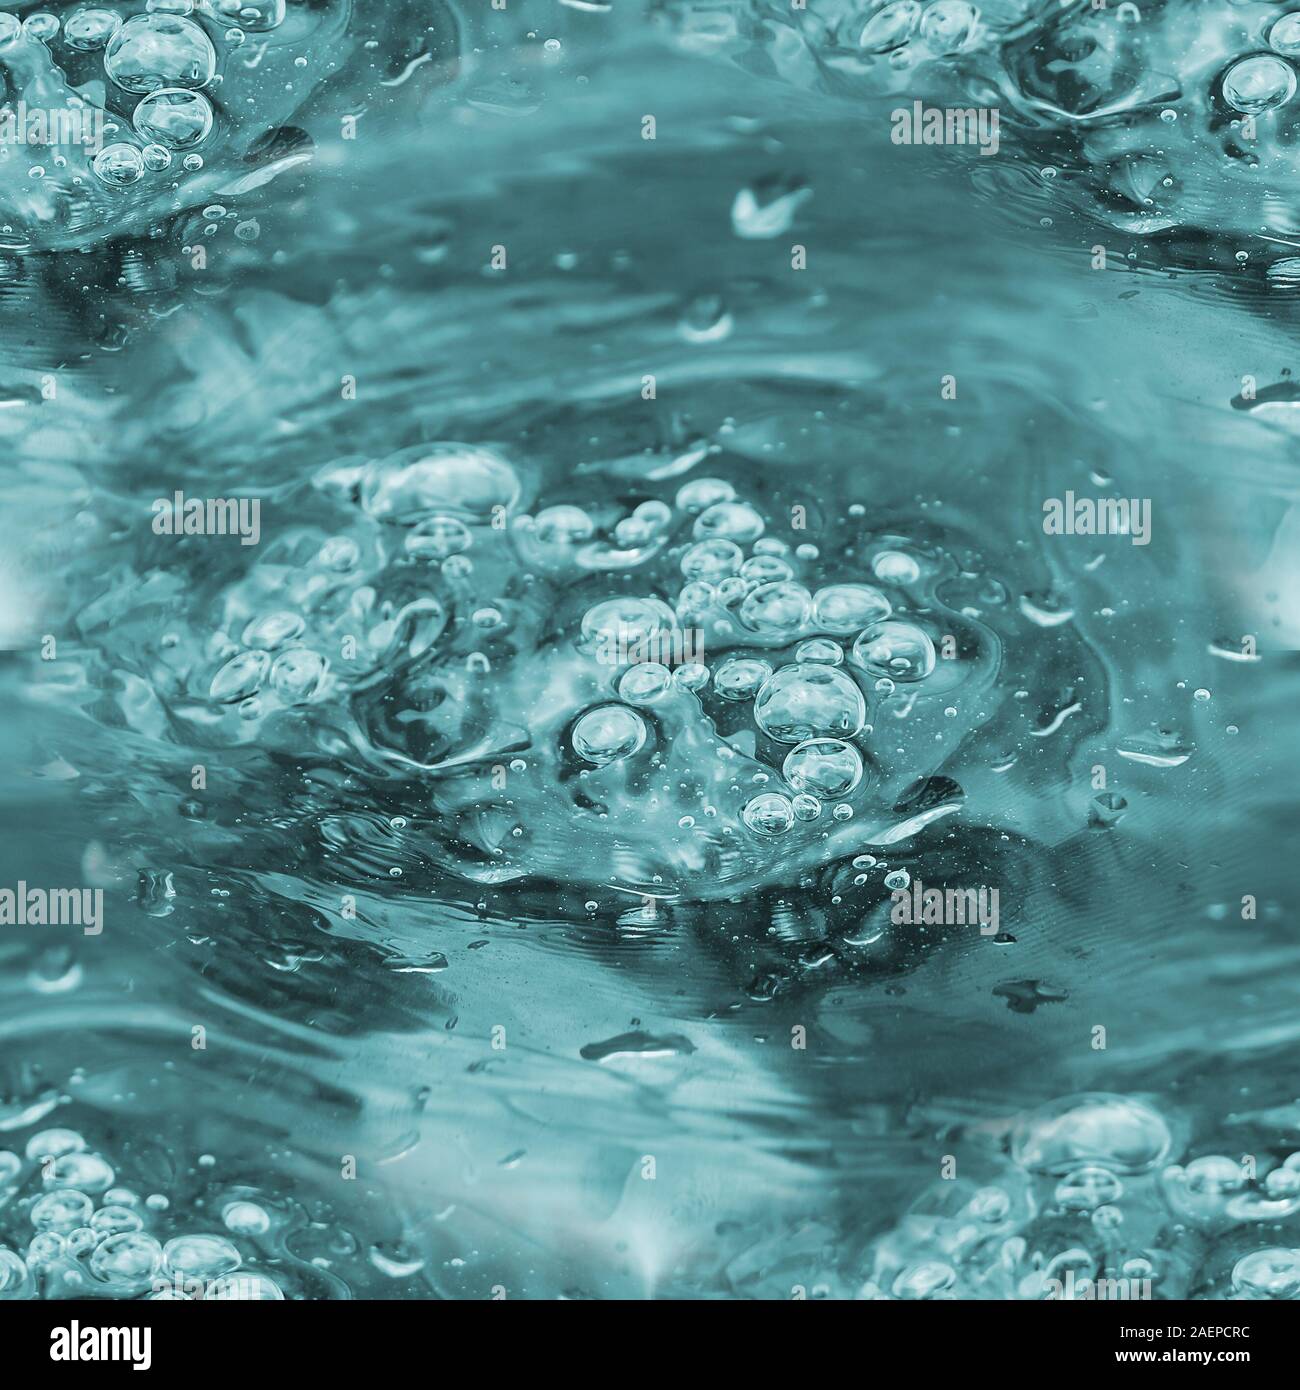 Blue boiling water with bubbles. seamless background Stock Photo